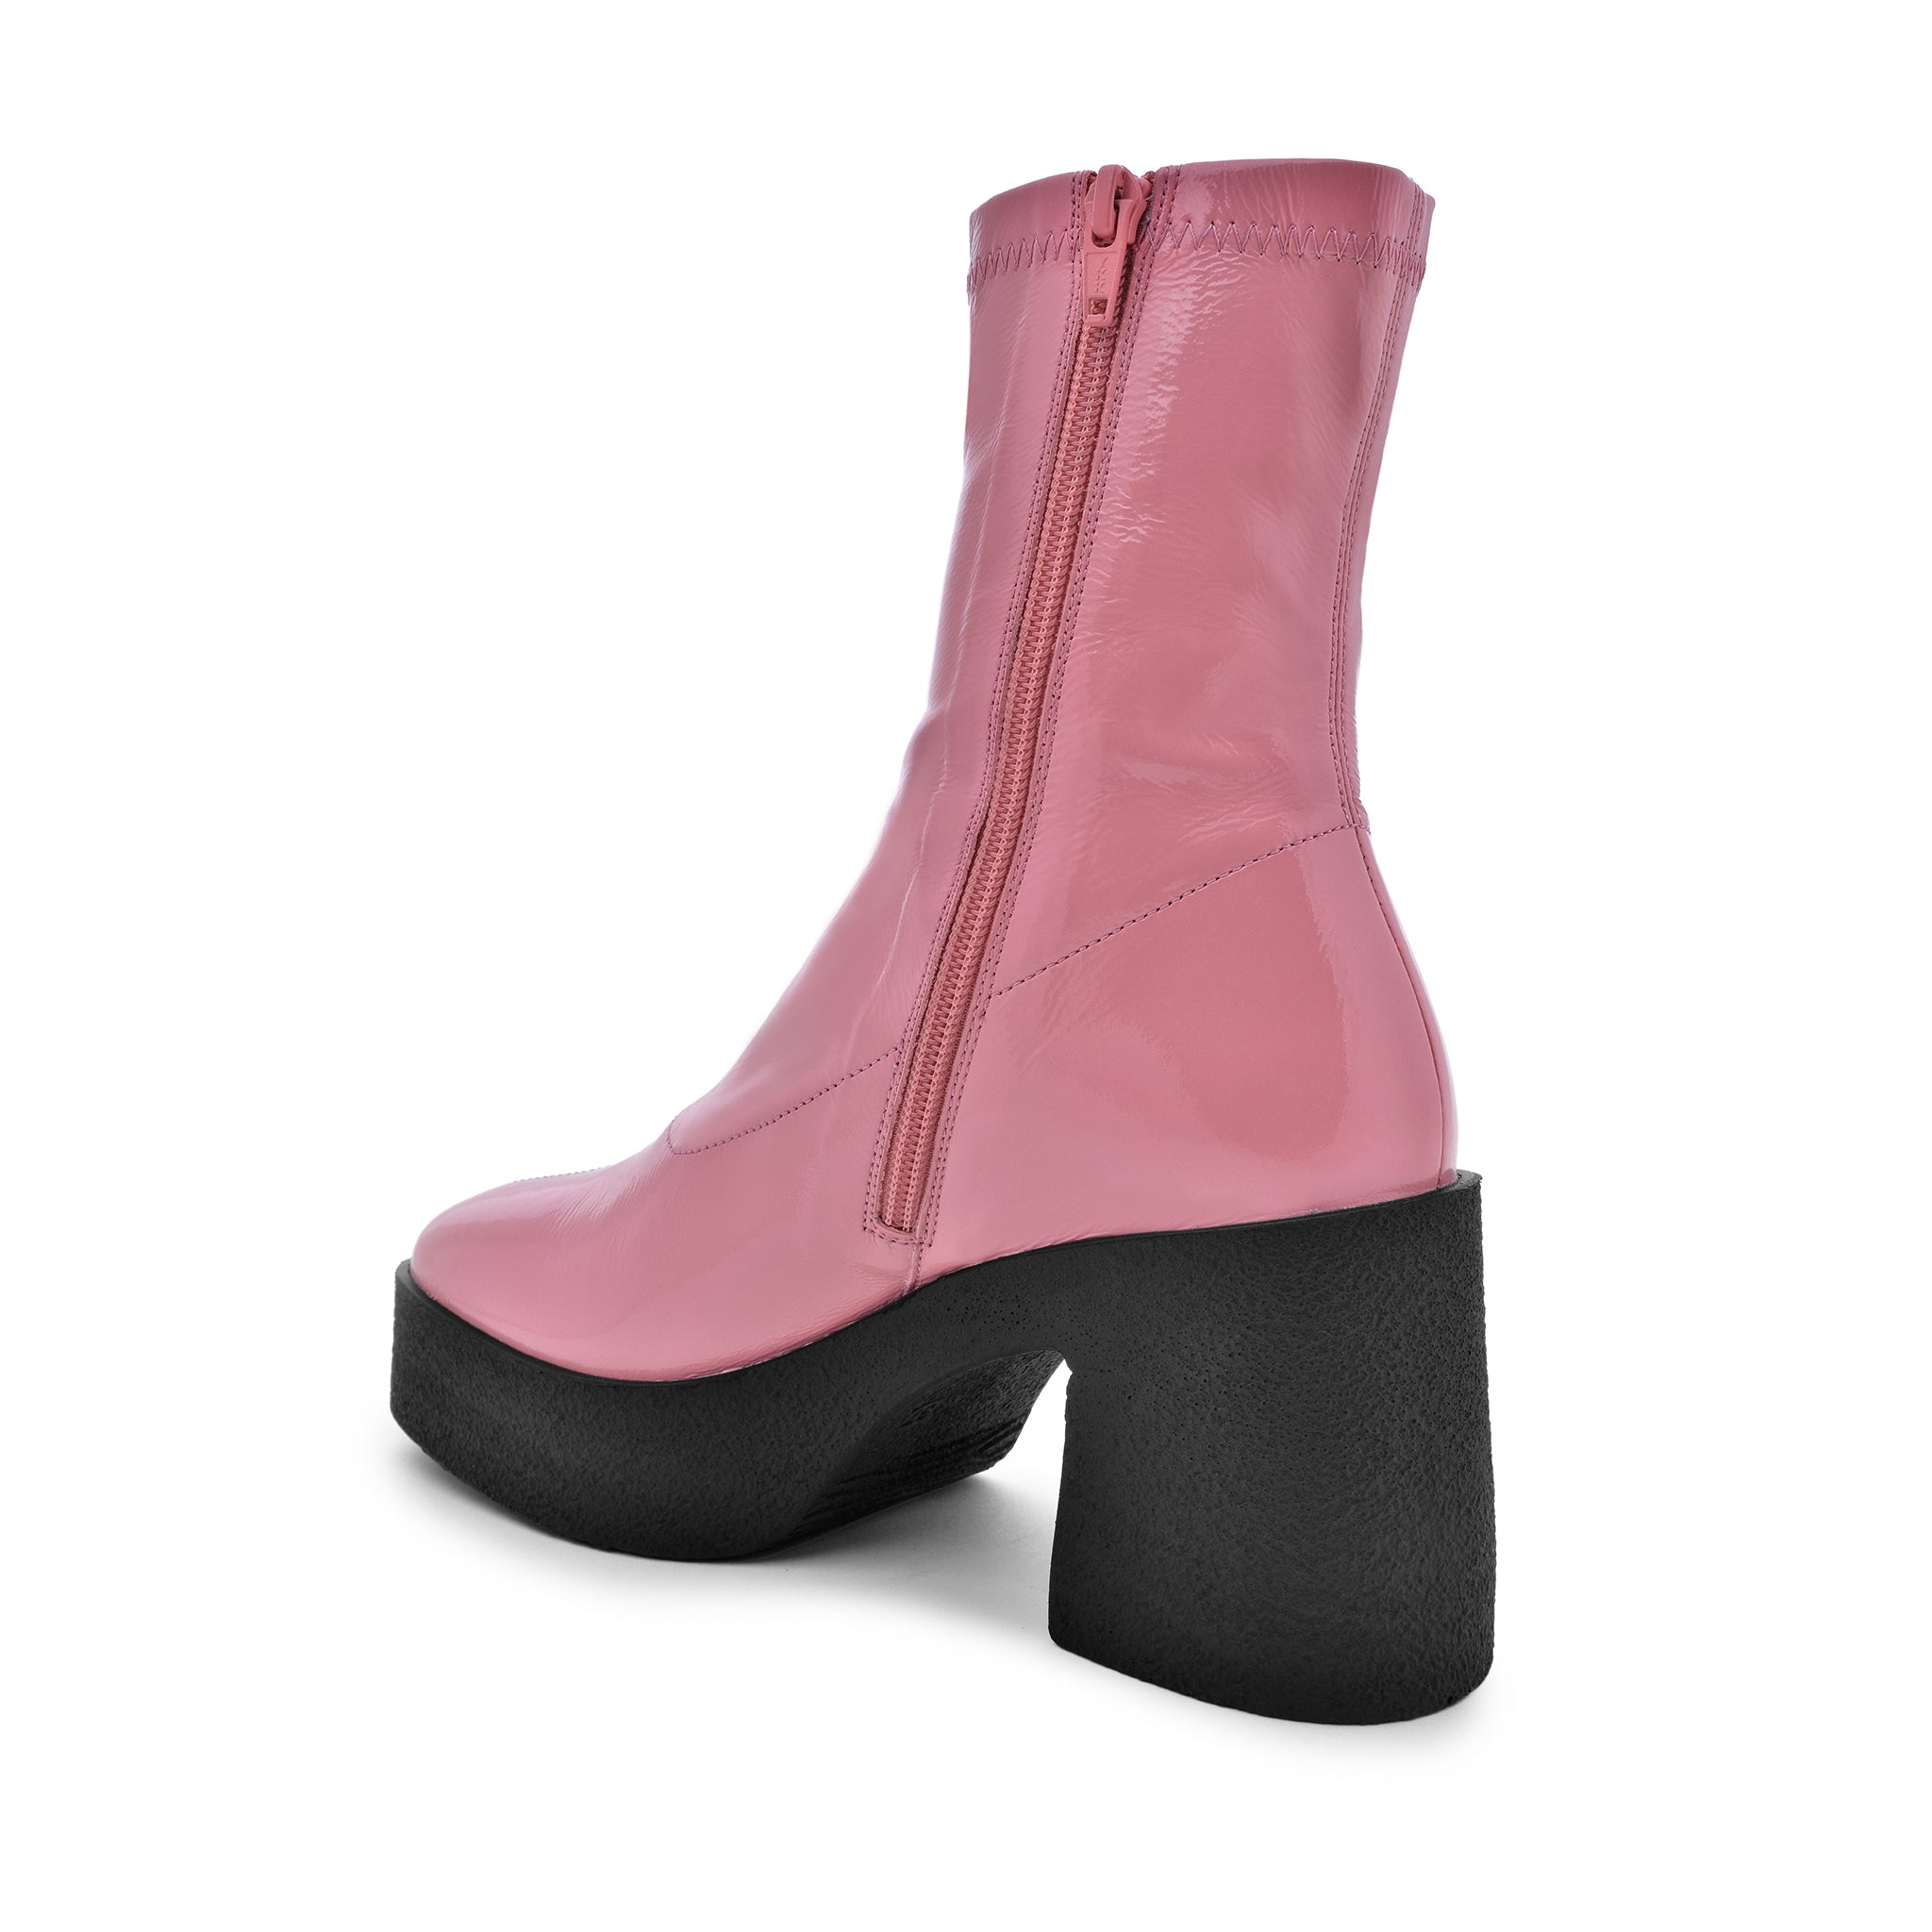 Umi Flamingo Pink Stretch Patent Chunky Ankle Boots 20077-02-16 - 7